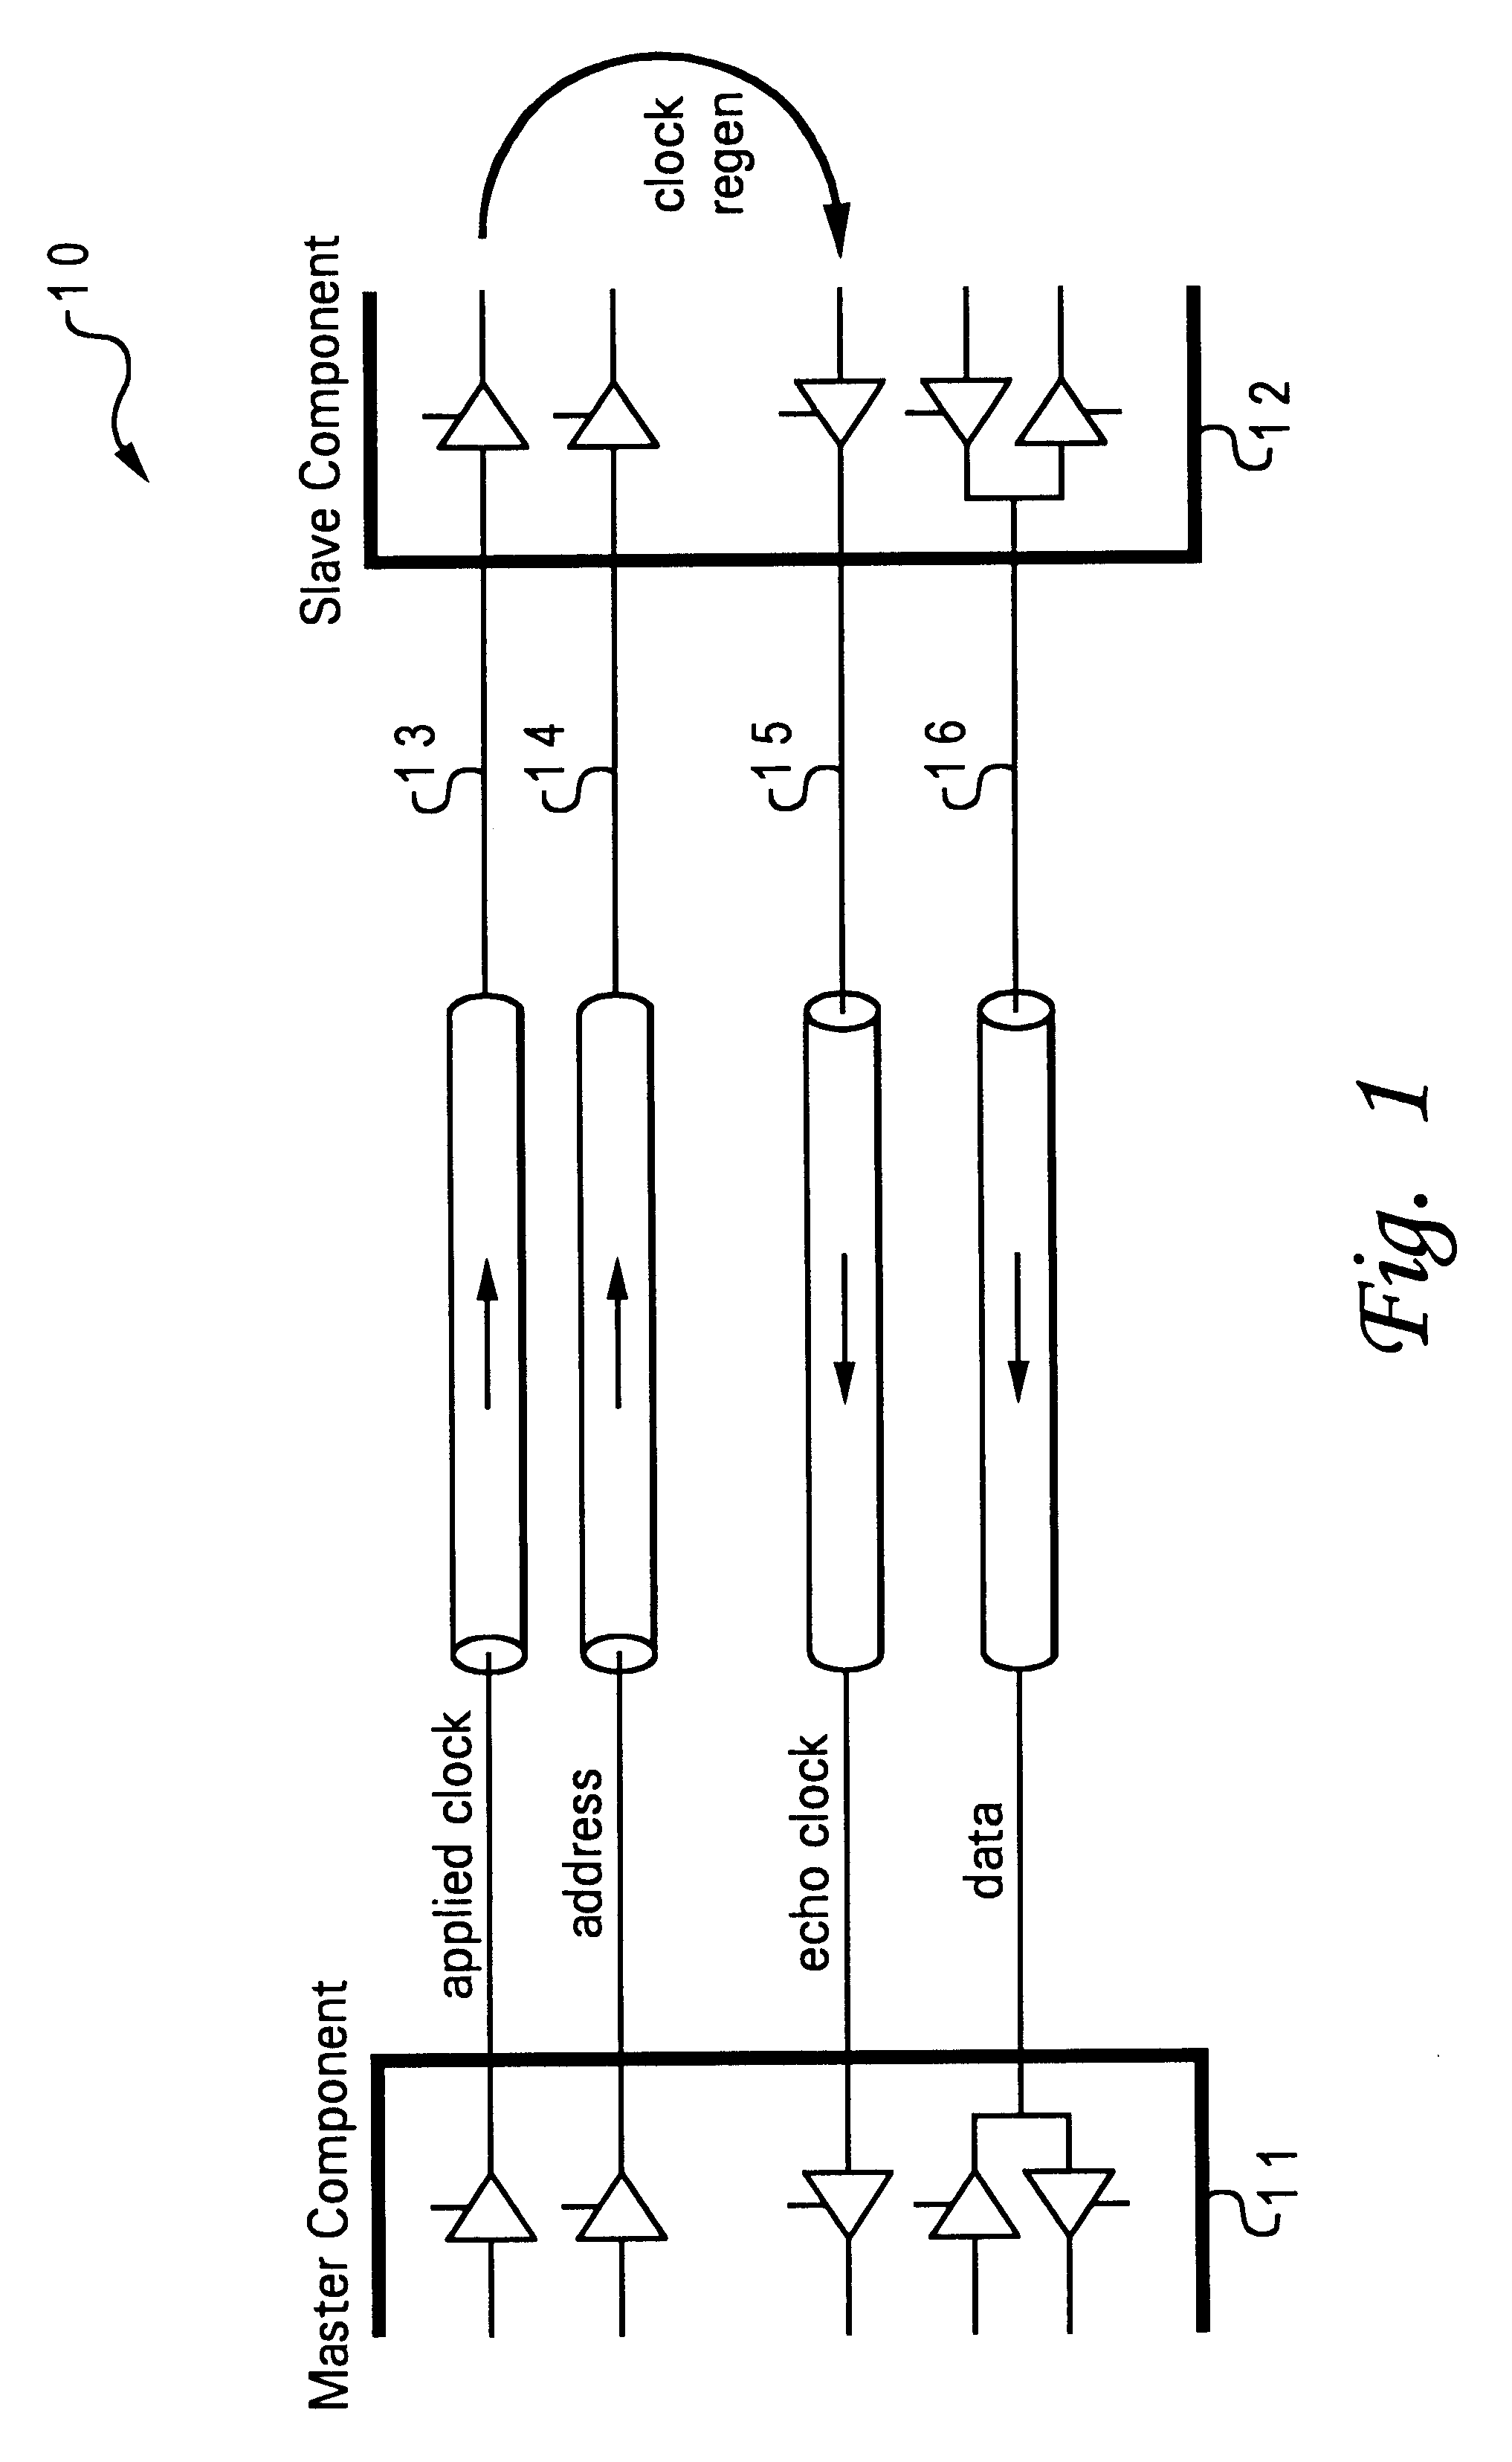 Method and system for verifying a source-synchronous communication interface of a device